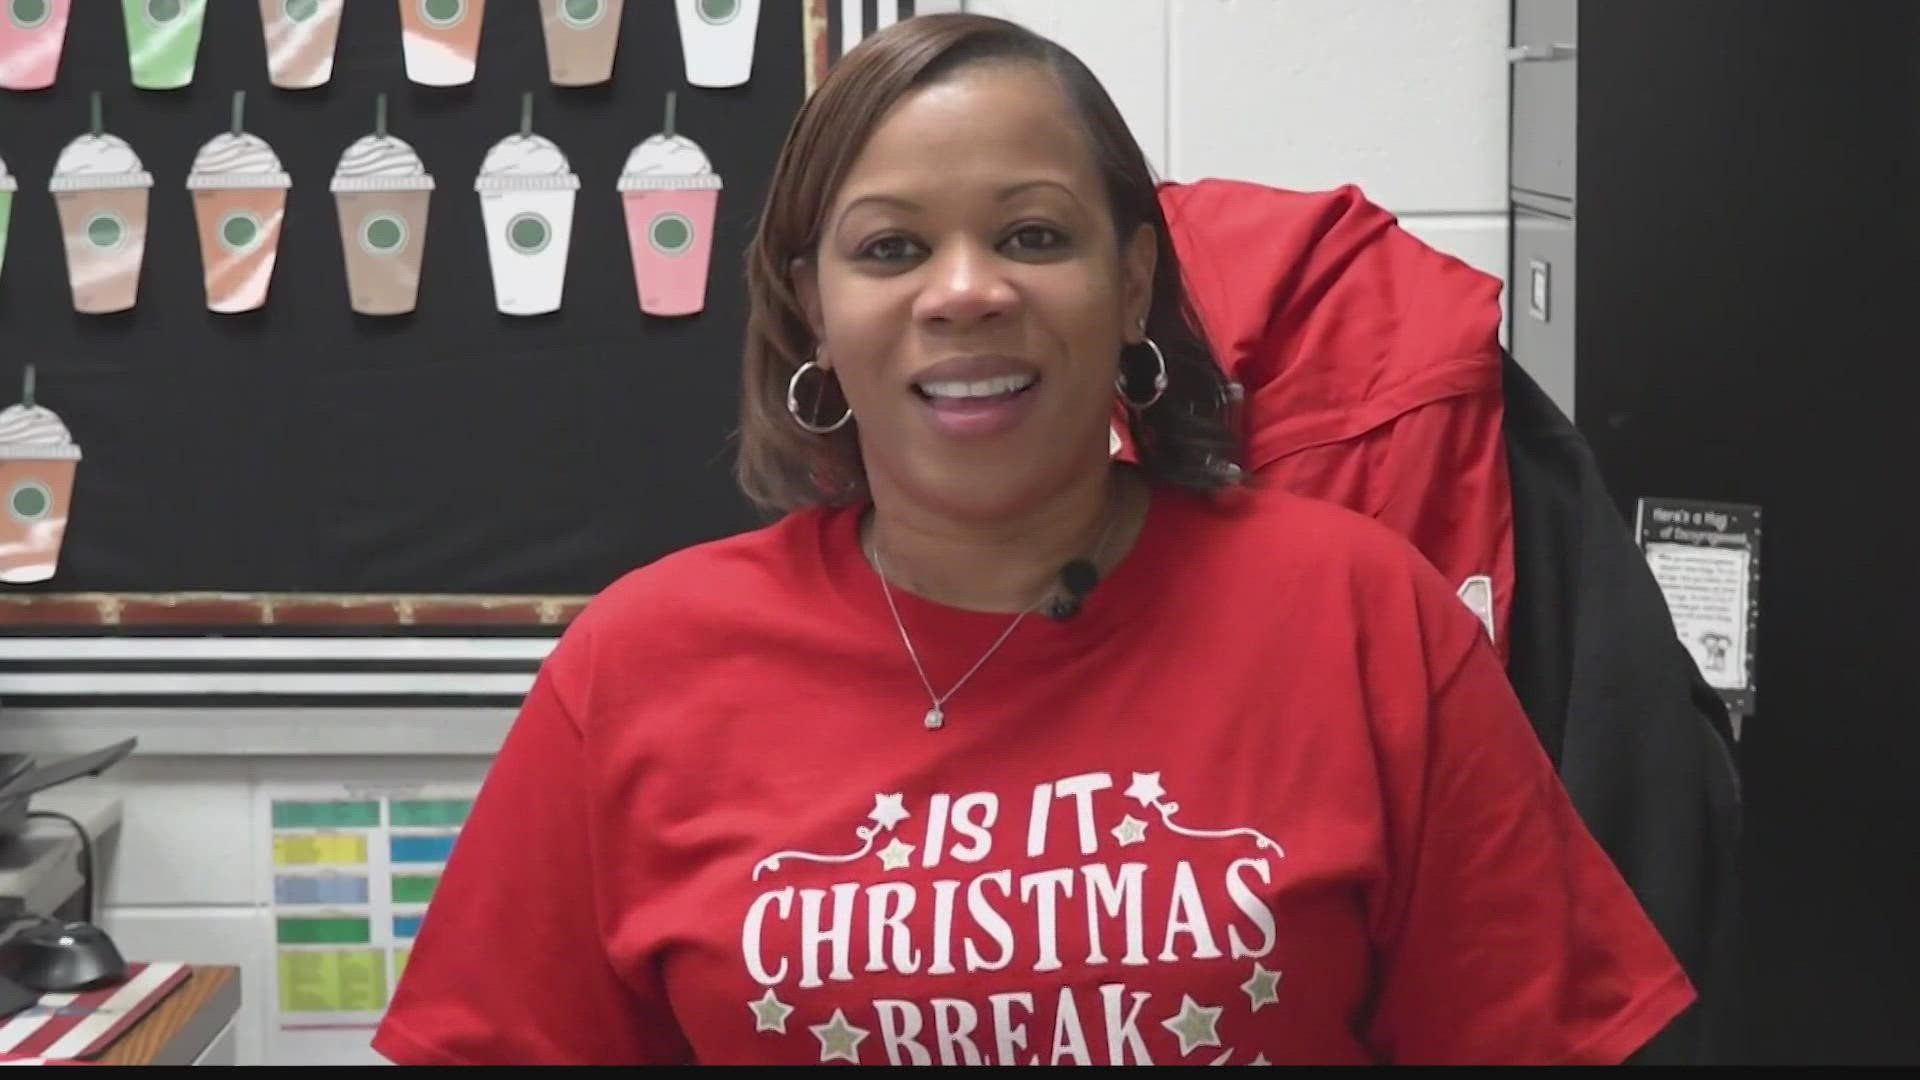 Every week, FOX54 News profiles great teachers nominated by the community.